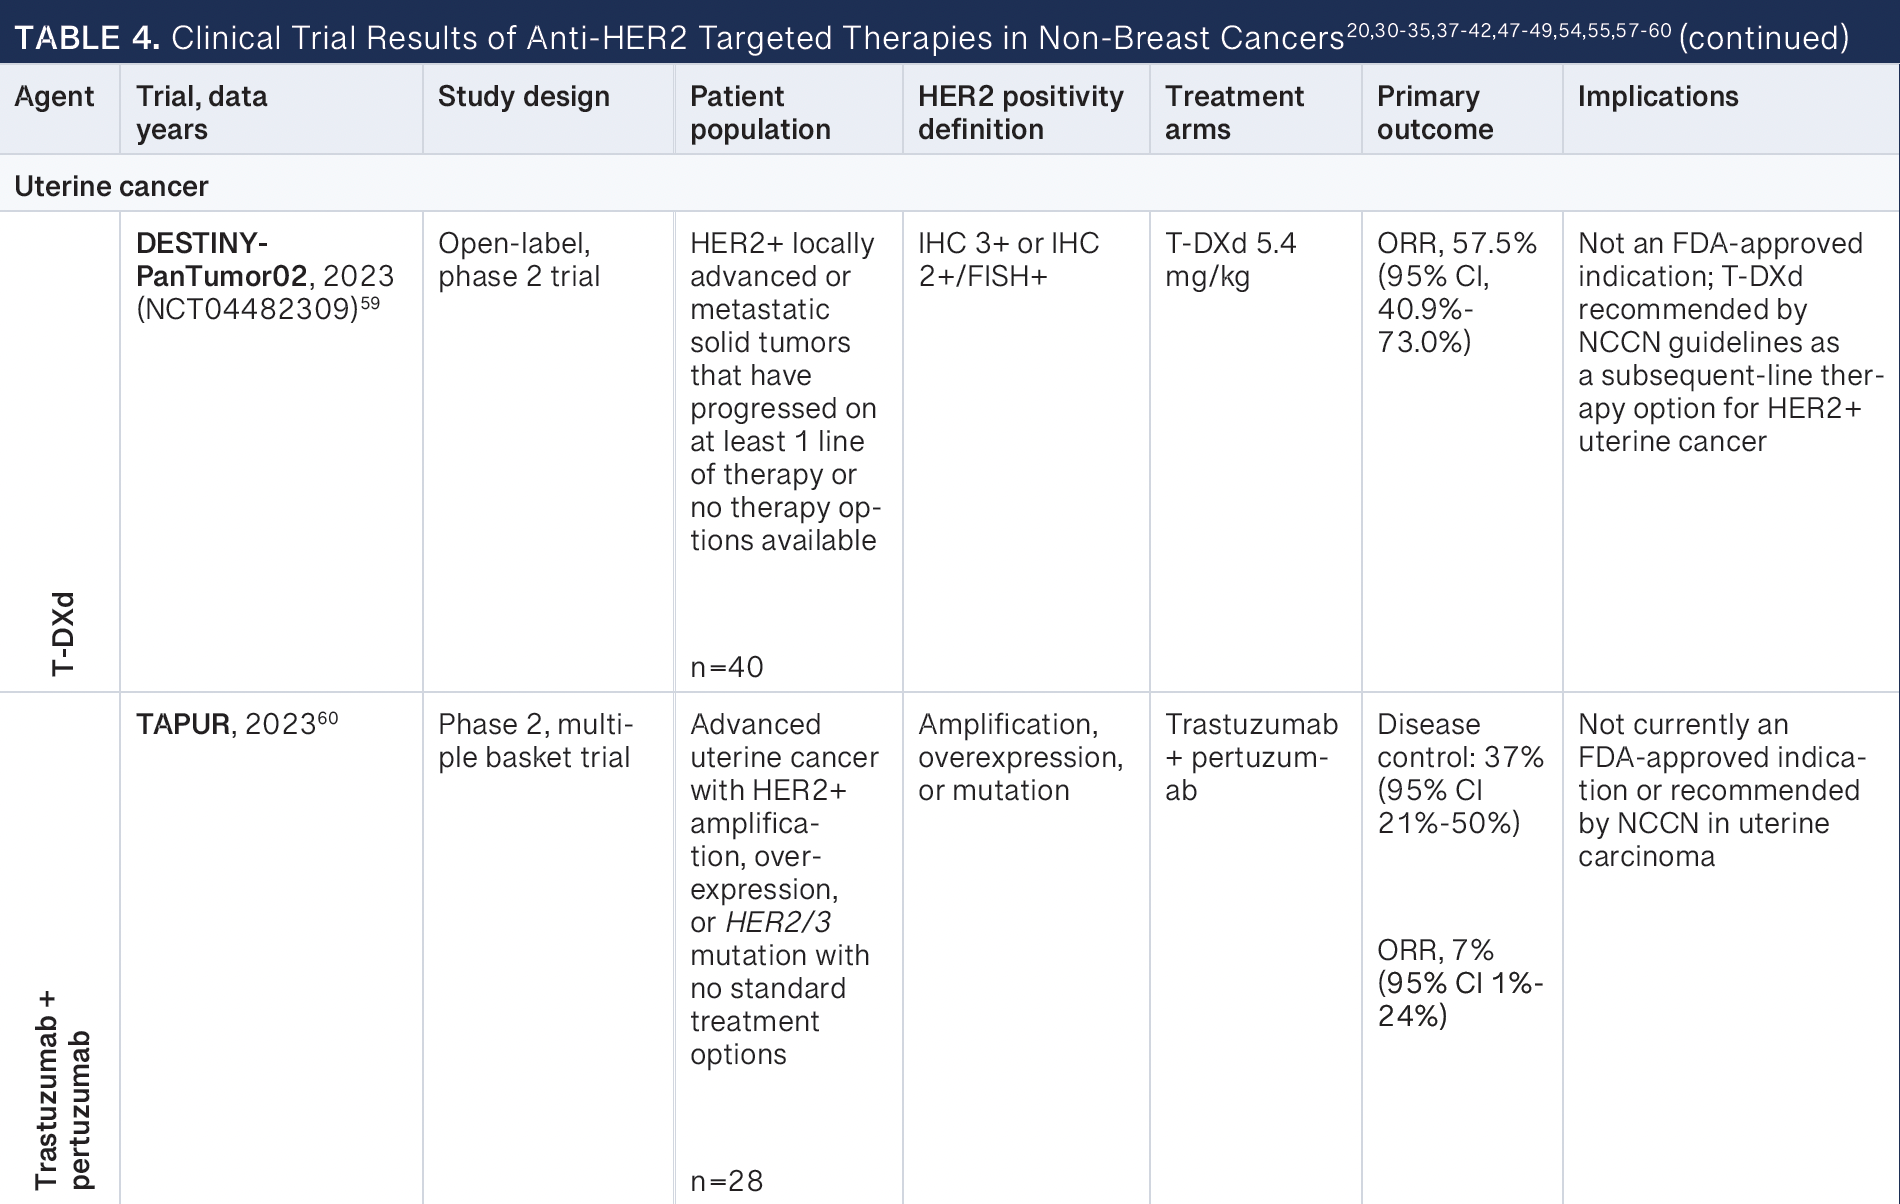 Table 4 (cont.) -- FISH, fluorescence in situ hybridization; IHC, immunohistochemistry; NCCN, National Comprehensive Cancer Network; ORR, objective response rate; T-DXd, trastuzumab deruxtecan.